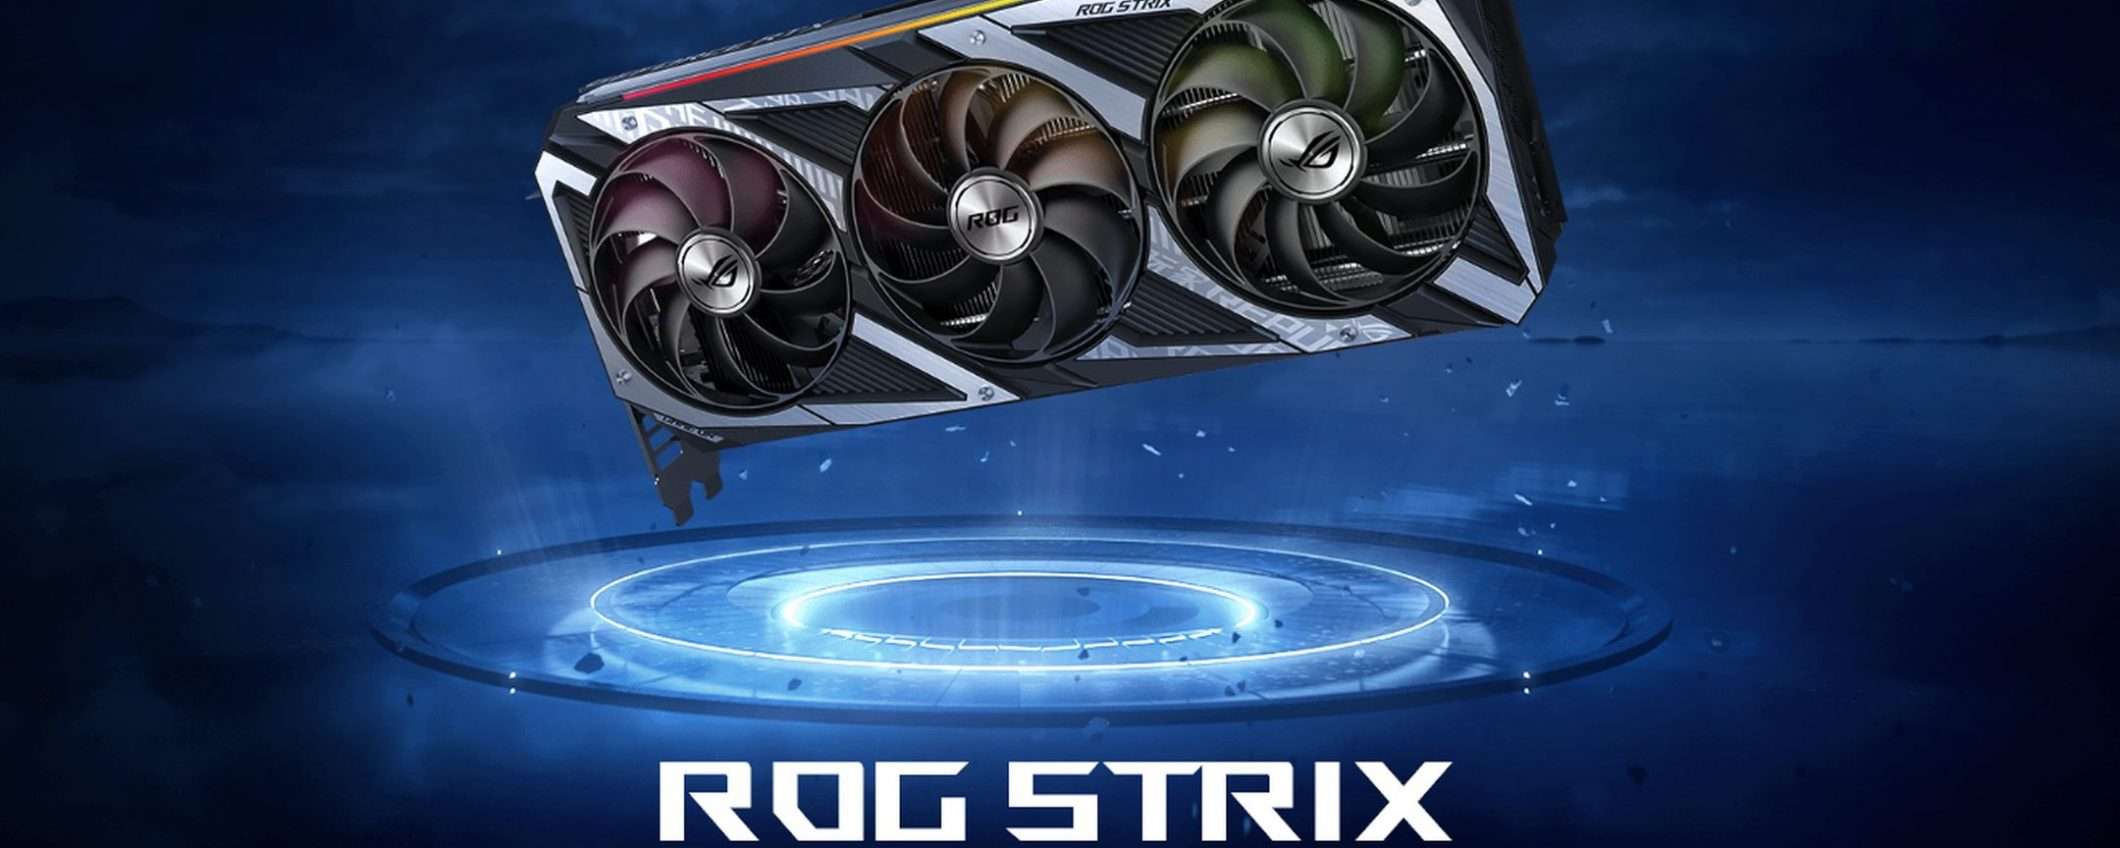 ASUS annuncia tre schede video GeForce RTX 3060